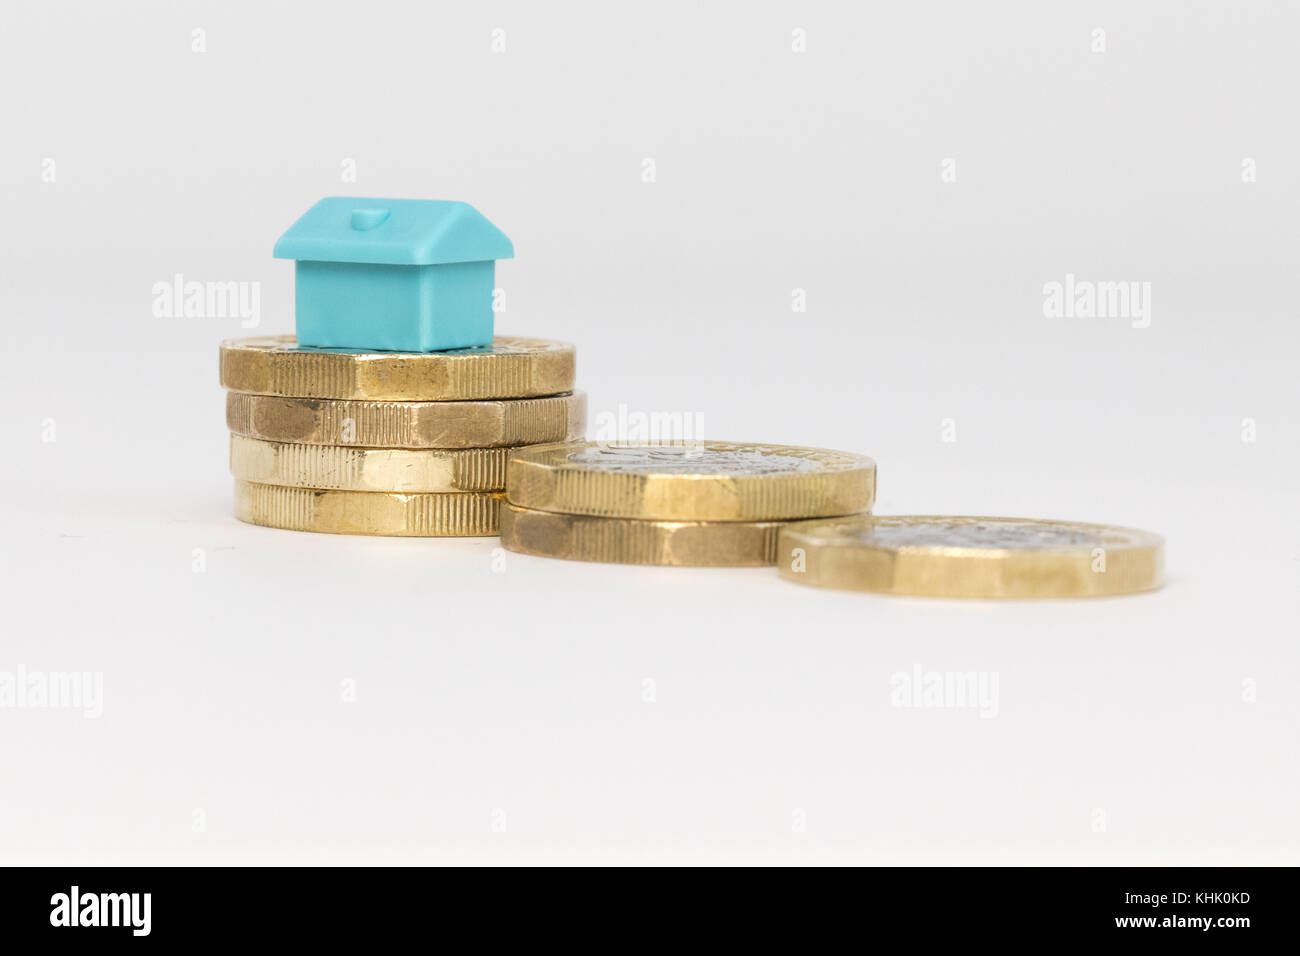 small house stacked on new uk pound coins Stock Photo